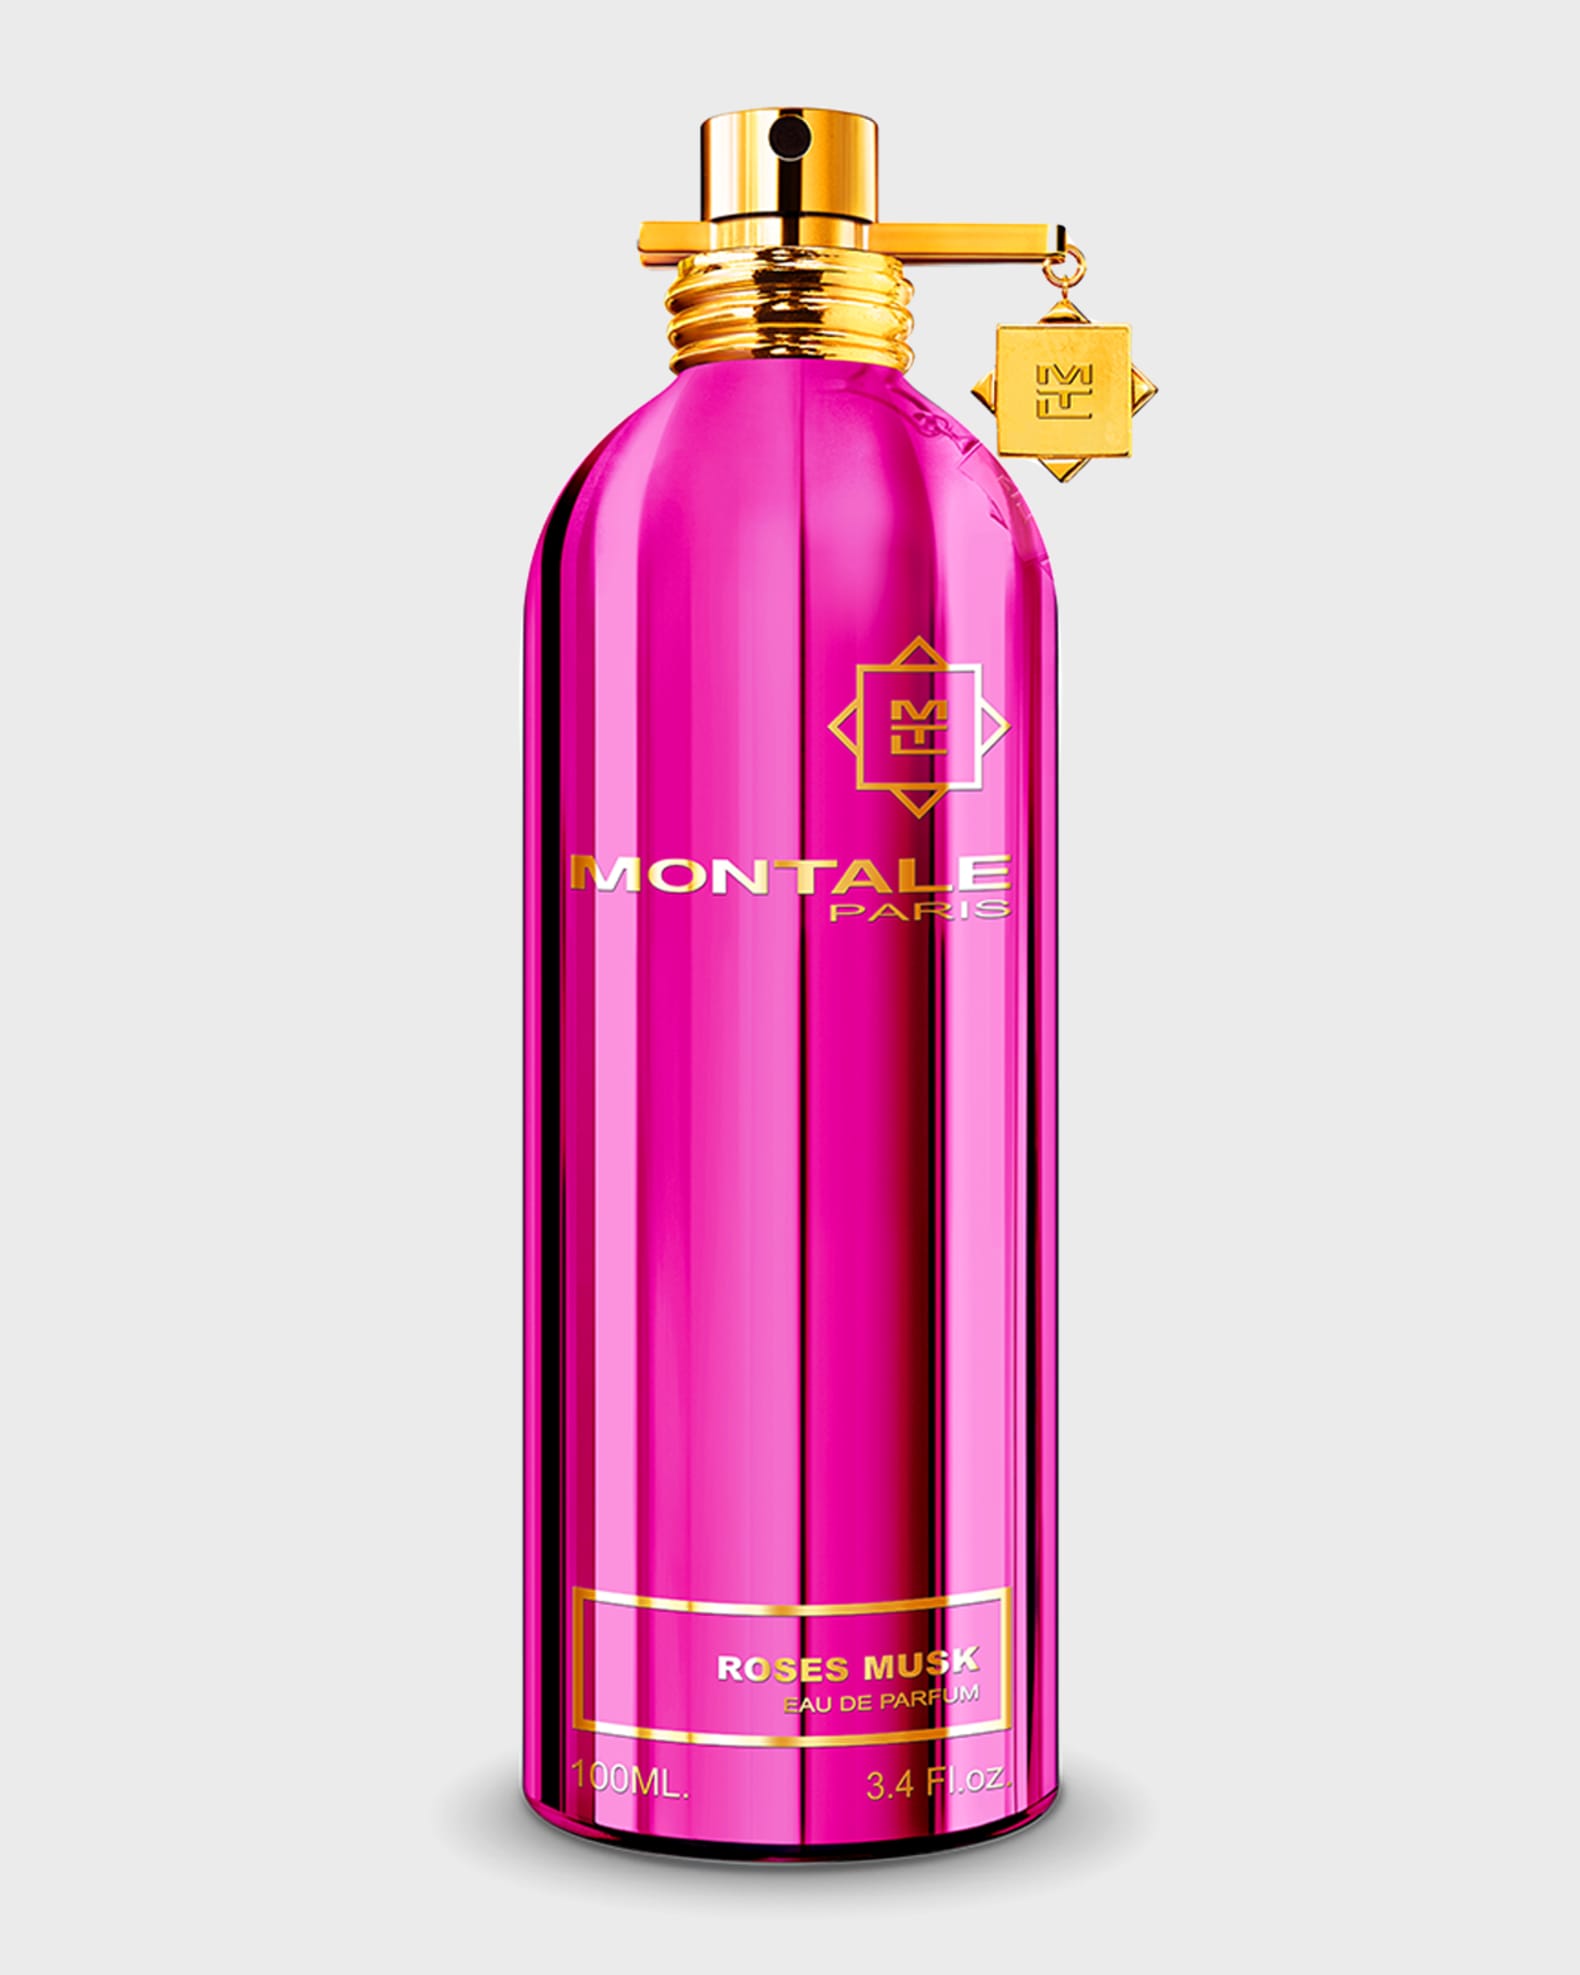 Roses musk парфюмерная вода. Montale Roses Musk 100ml. Духи Montale Paris Roses Musk. Montale Roses Musk Perfume. Montale Roses Musk 100 мл.